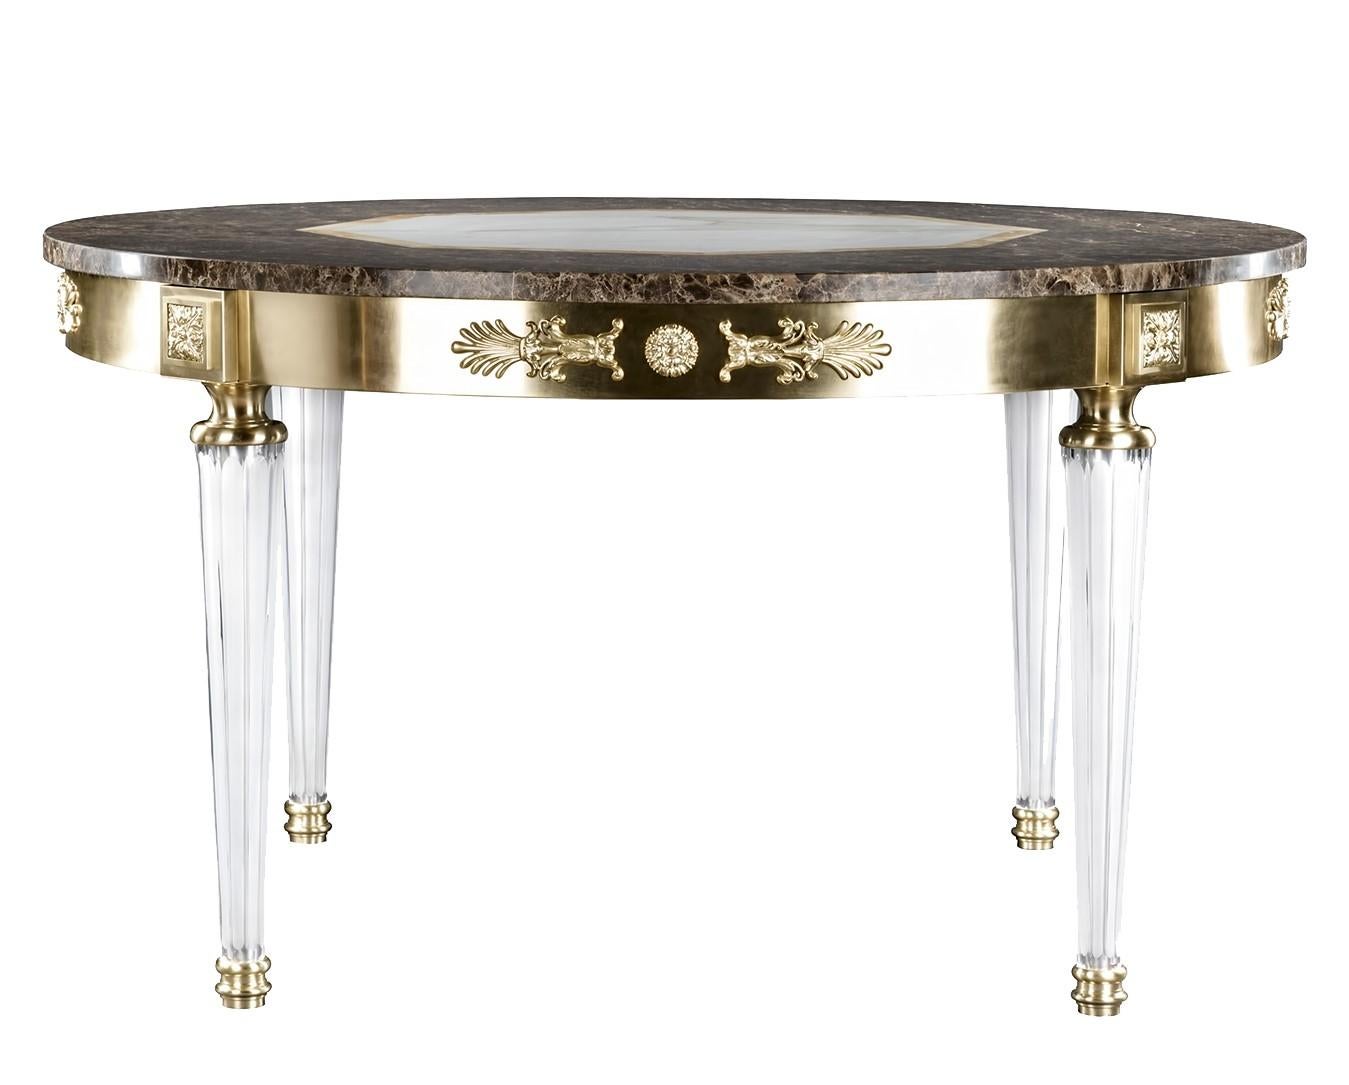 Fine details and precious materials define this sophisticated table of neoclassic inspiration. A striking slab of Emperador marble with an hexagonal Calacatta marble centre and Siena yellow inlays graces the round top, supported by handcut crystal